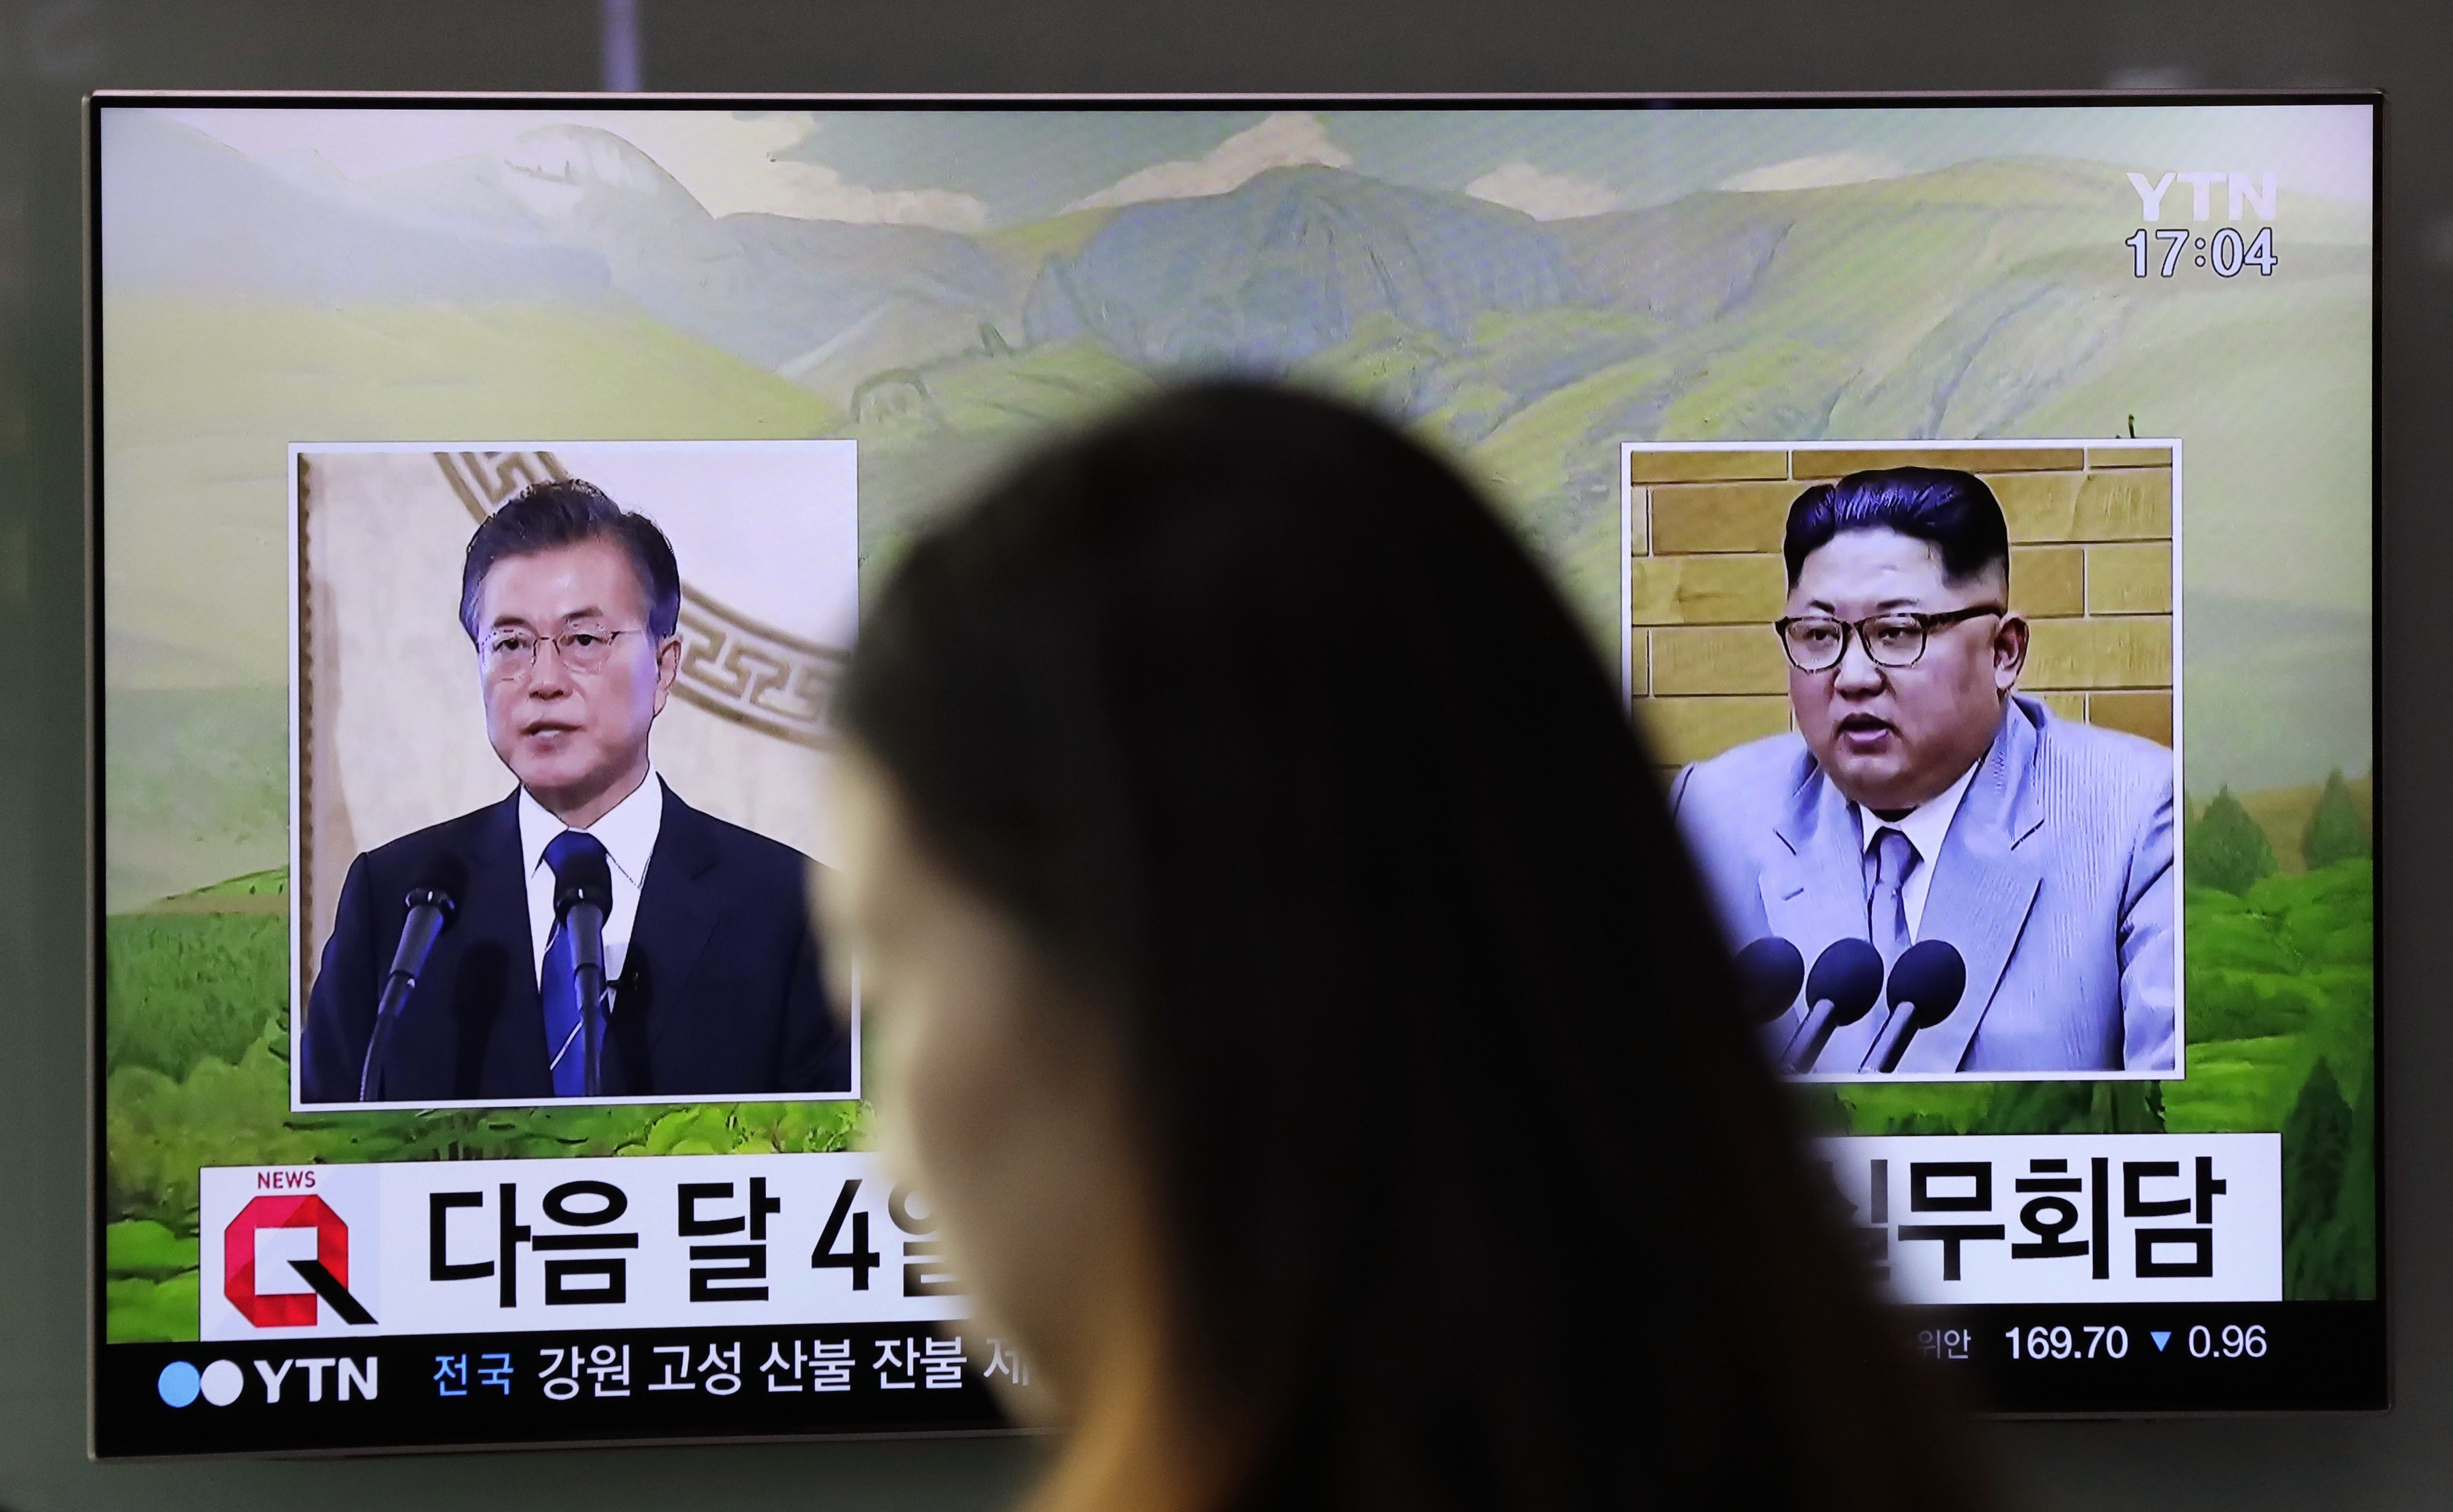 You might expect Moon Jae-in – a former human rights lawyer – would have something to say about the issue when he meets Kim Jong-un. So why will it remain an elephant in the room?